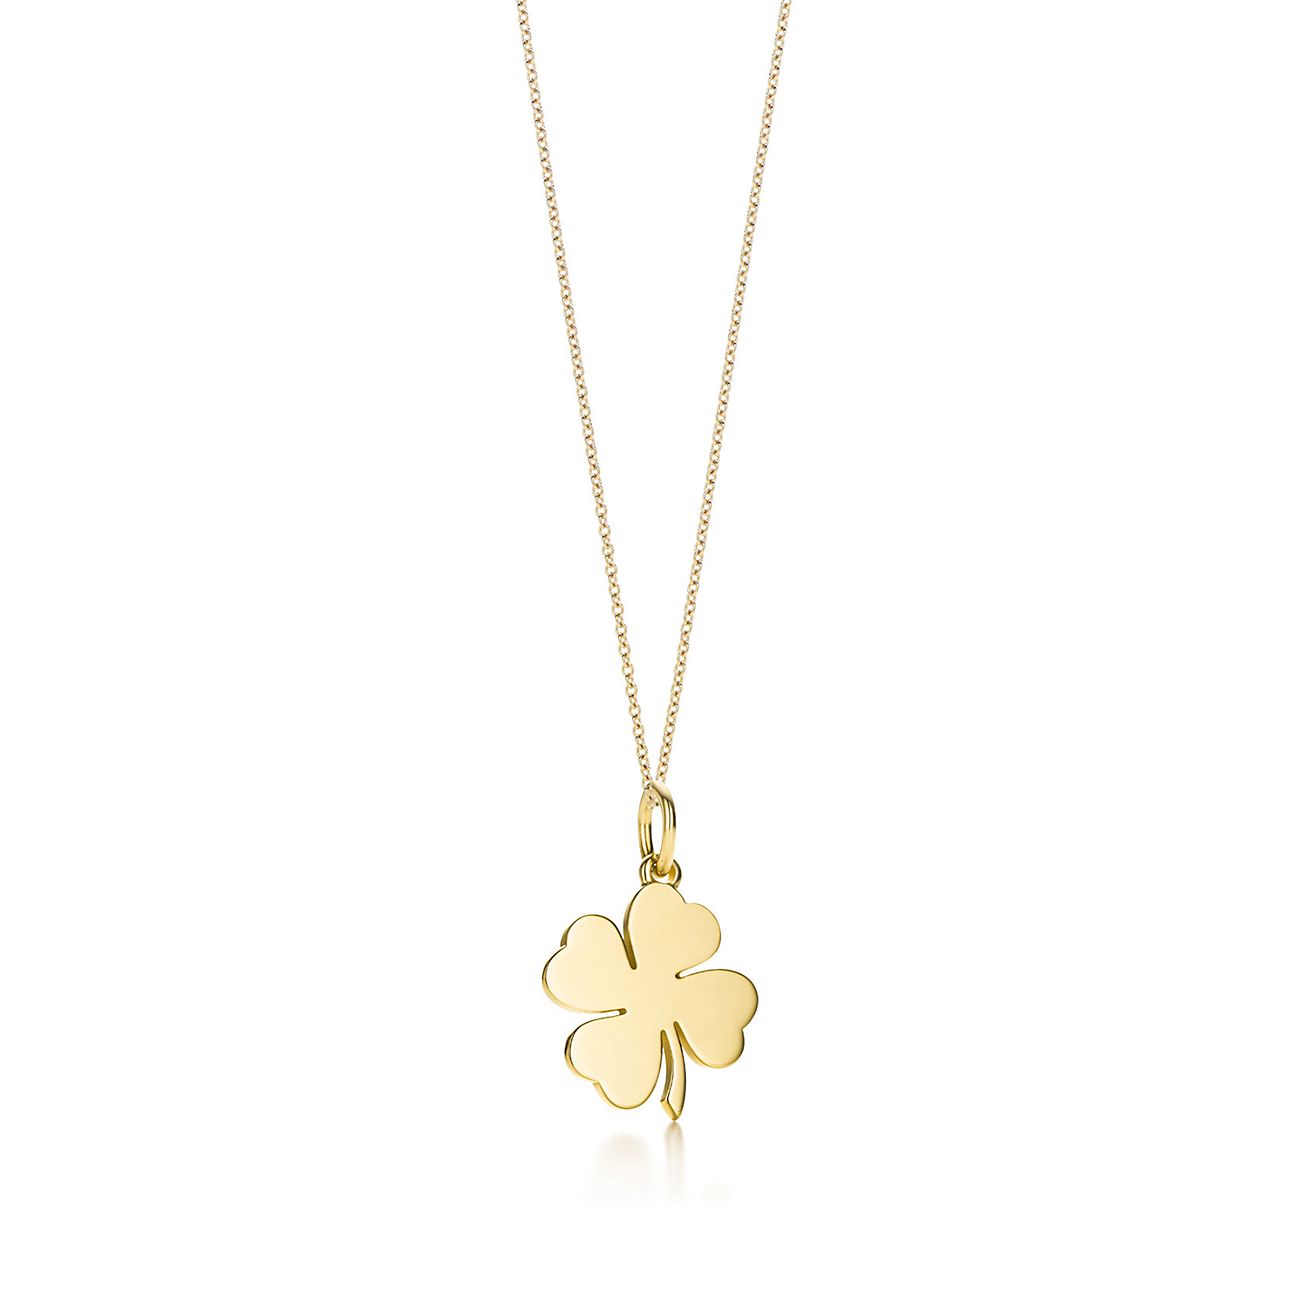 Four Leaf Clover charm in 18k gold, on 